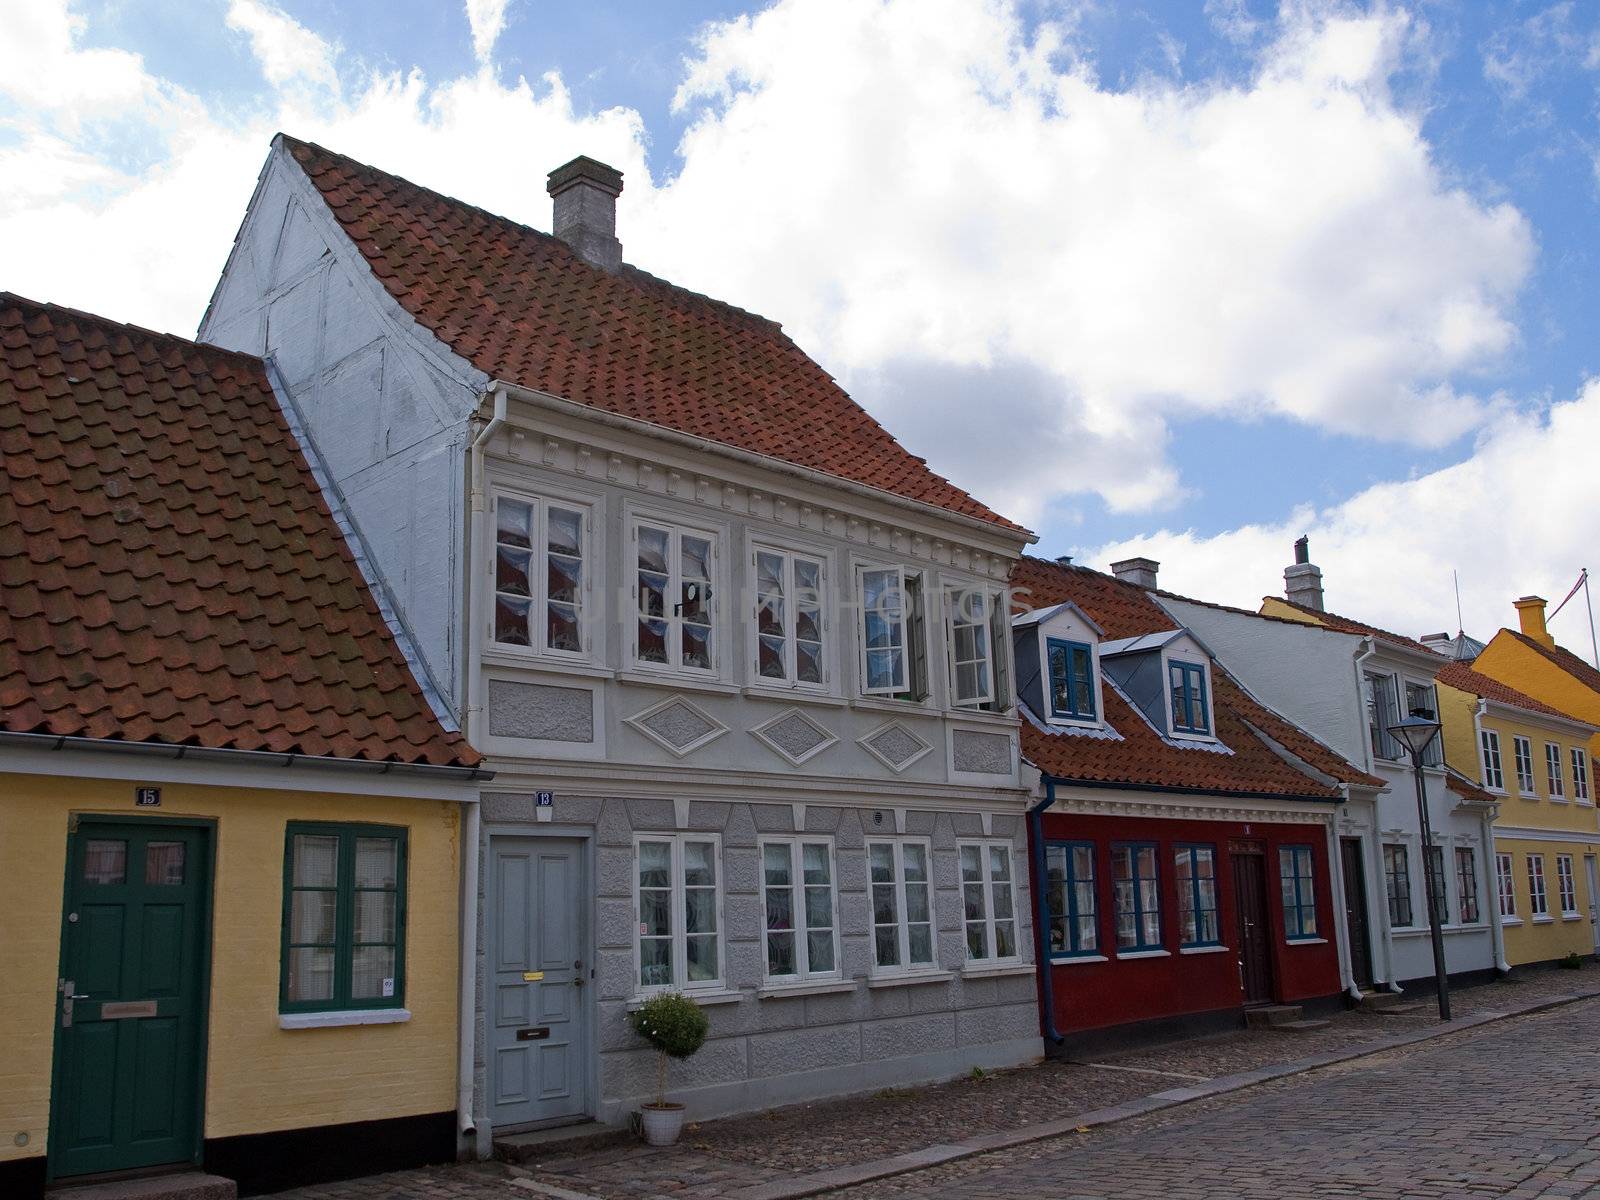 Old style danish houses Odense Denmark by Ronyzmbow